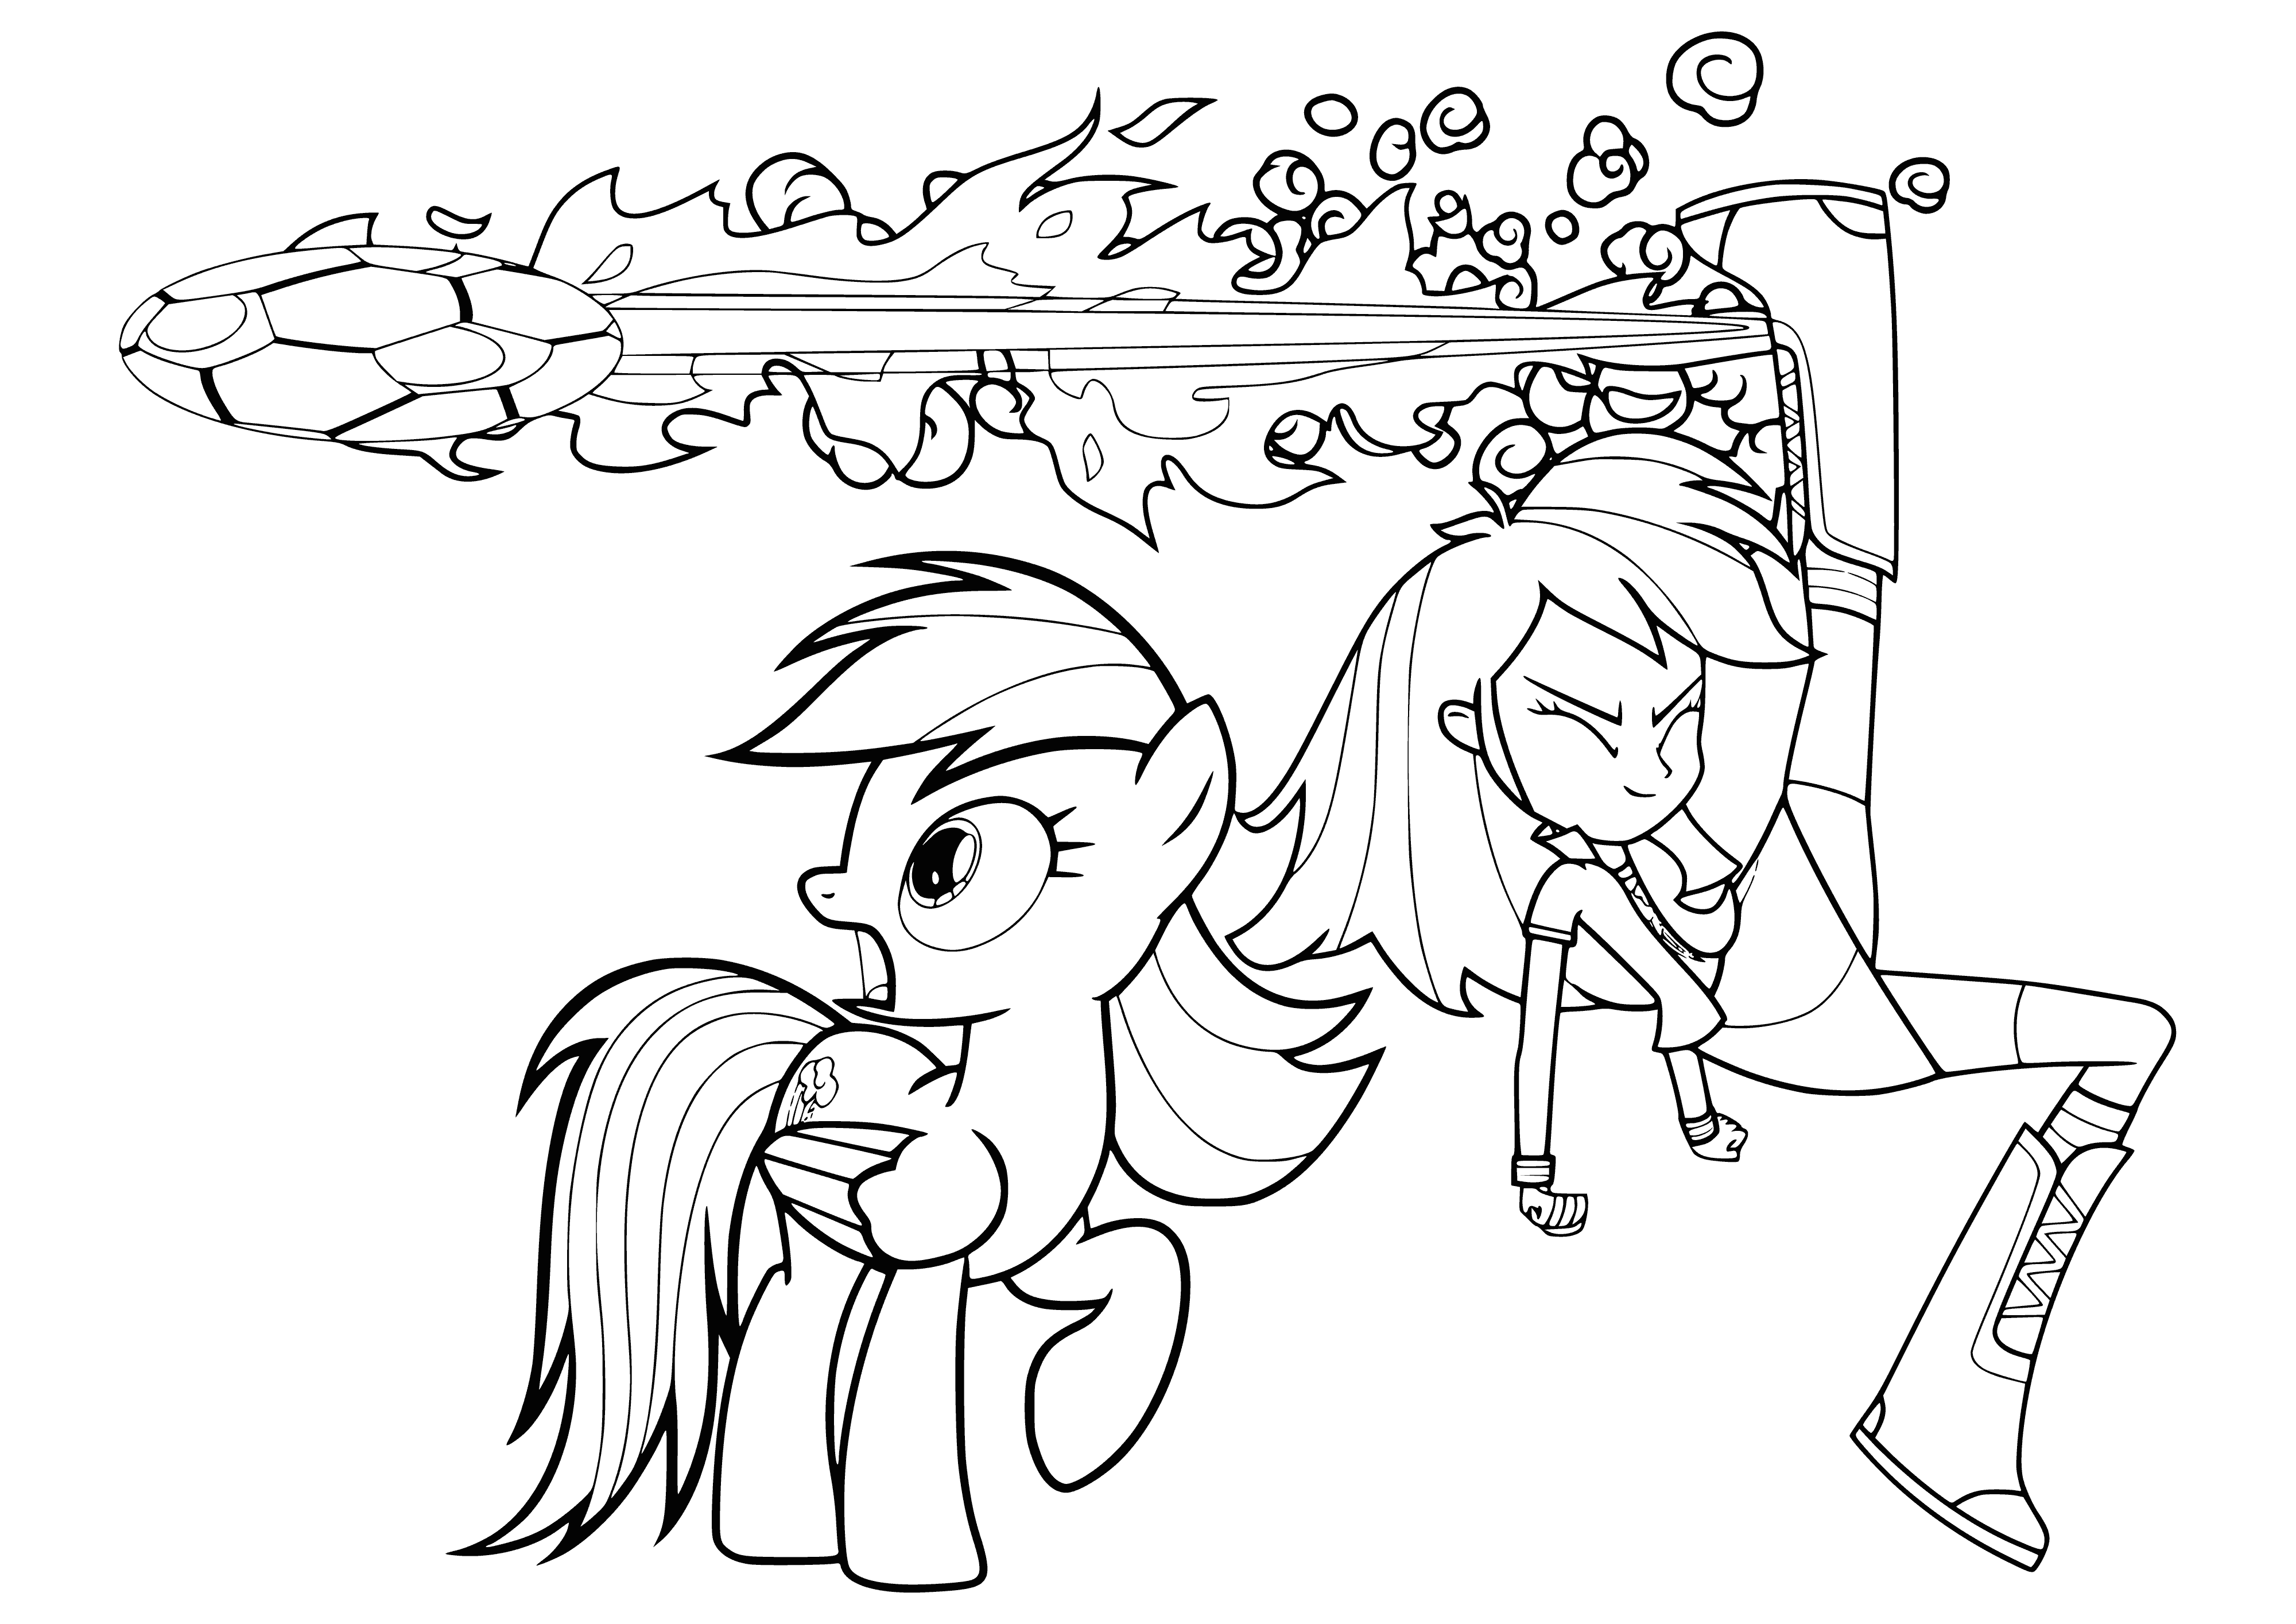 coloring page: Girl Rainbow Dash is on stage in blue & yellow hair, blue shirt w/ white lightning bolt, & blue bracelet. Pony Rainbow Dash is next to her, also wearing a blue bracelet.